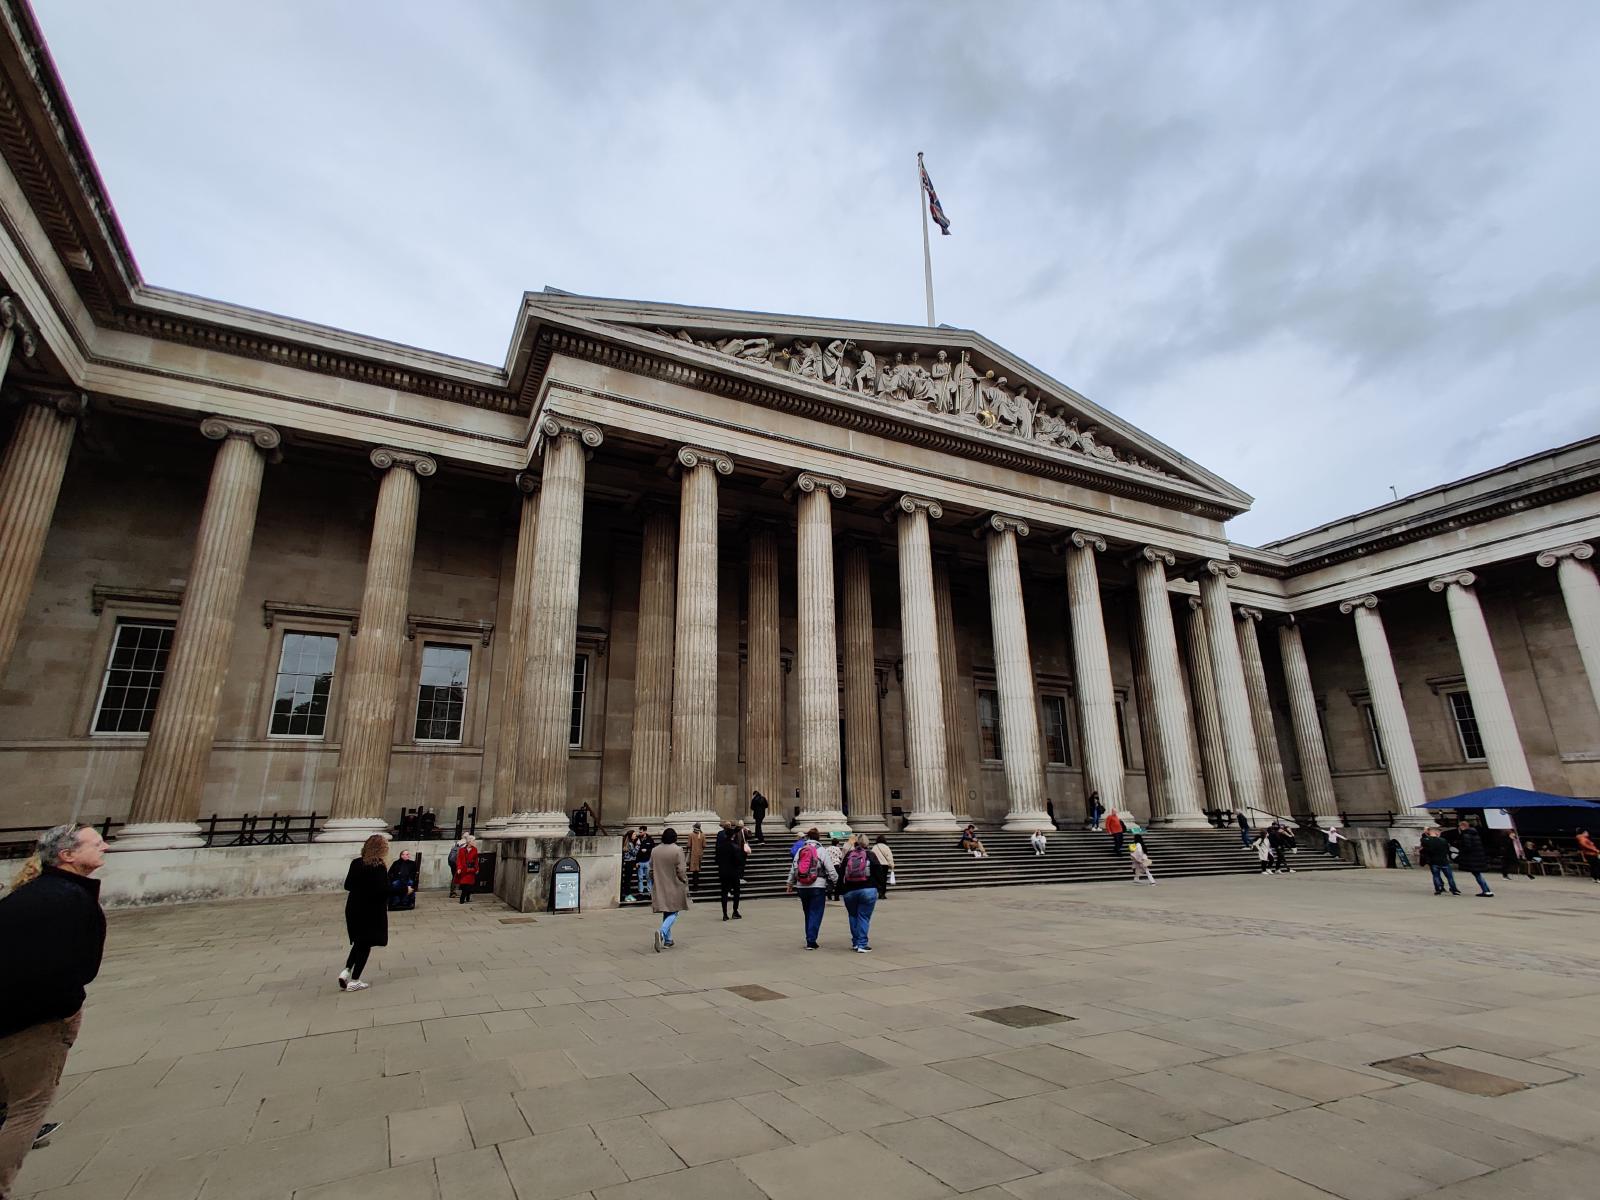 The front of the British Museum